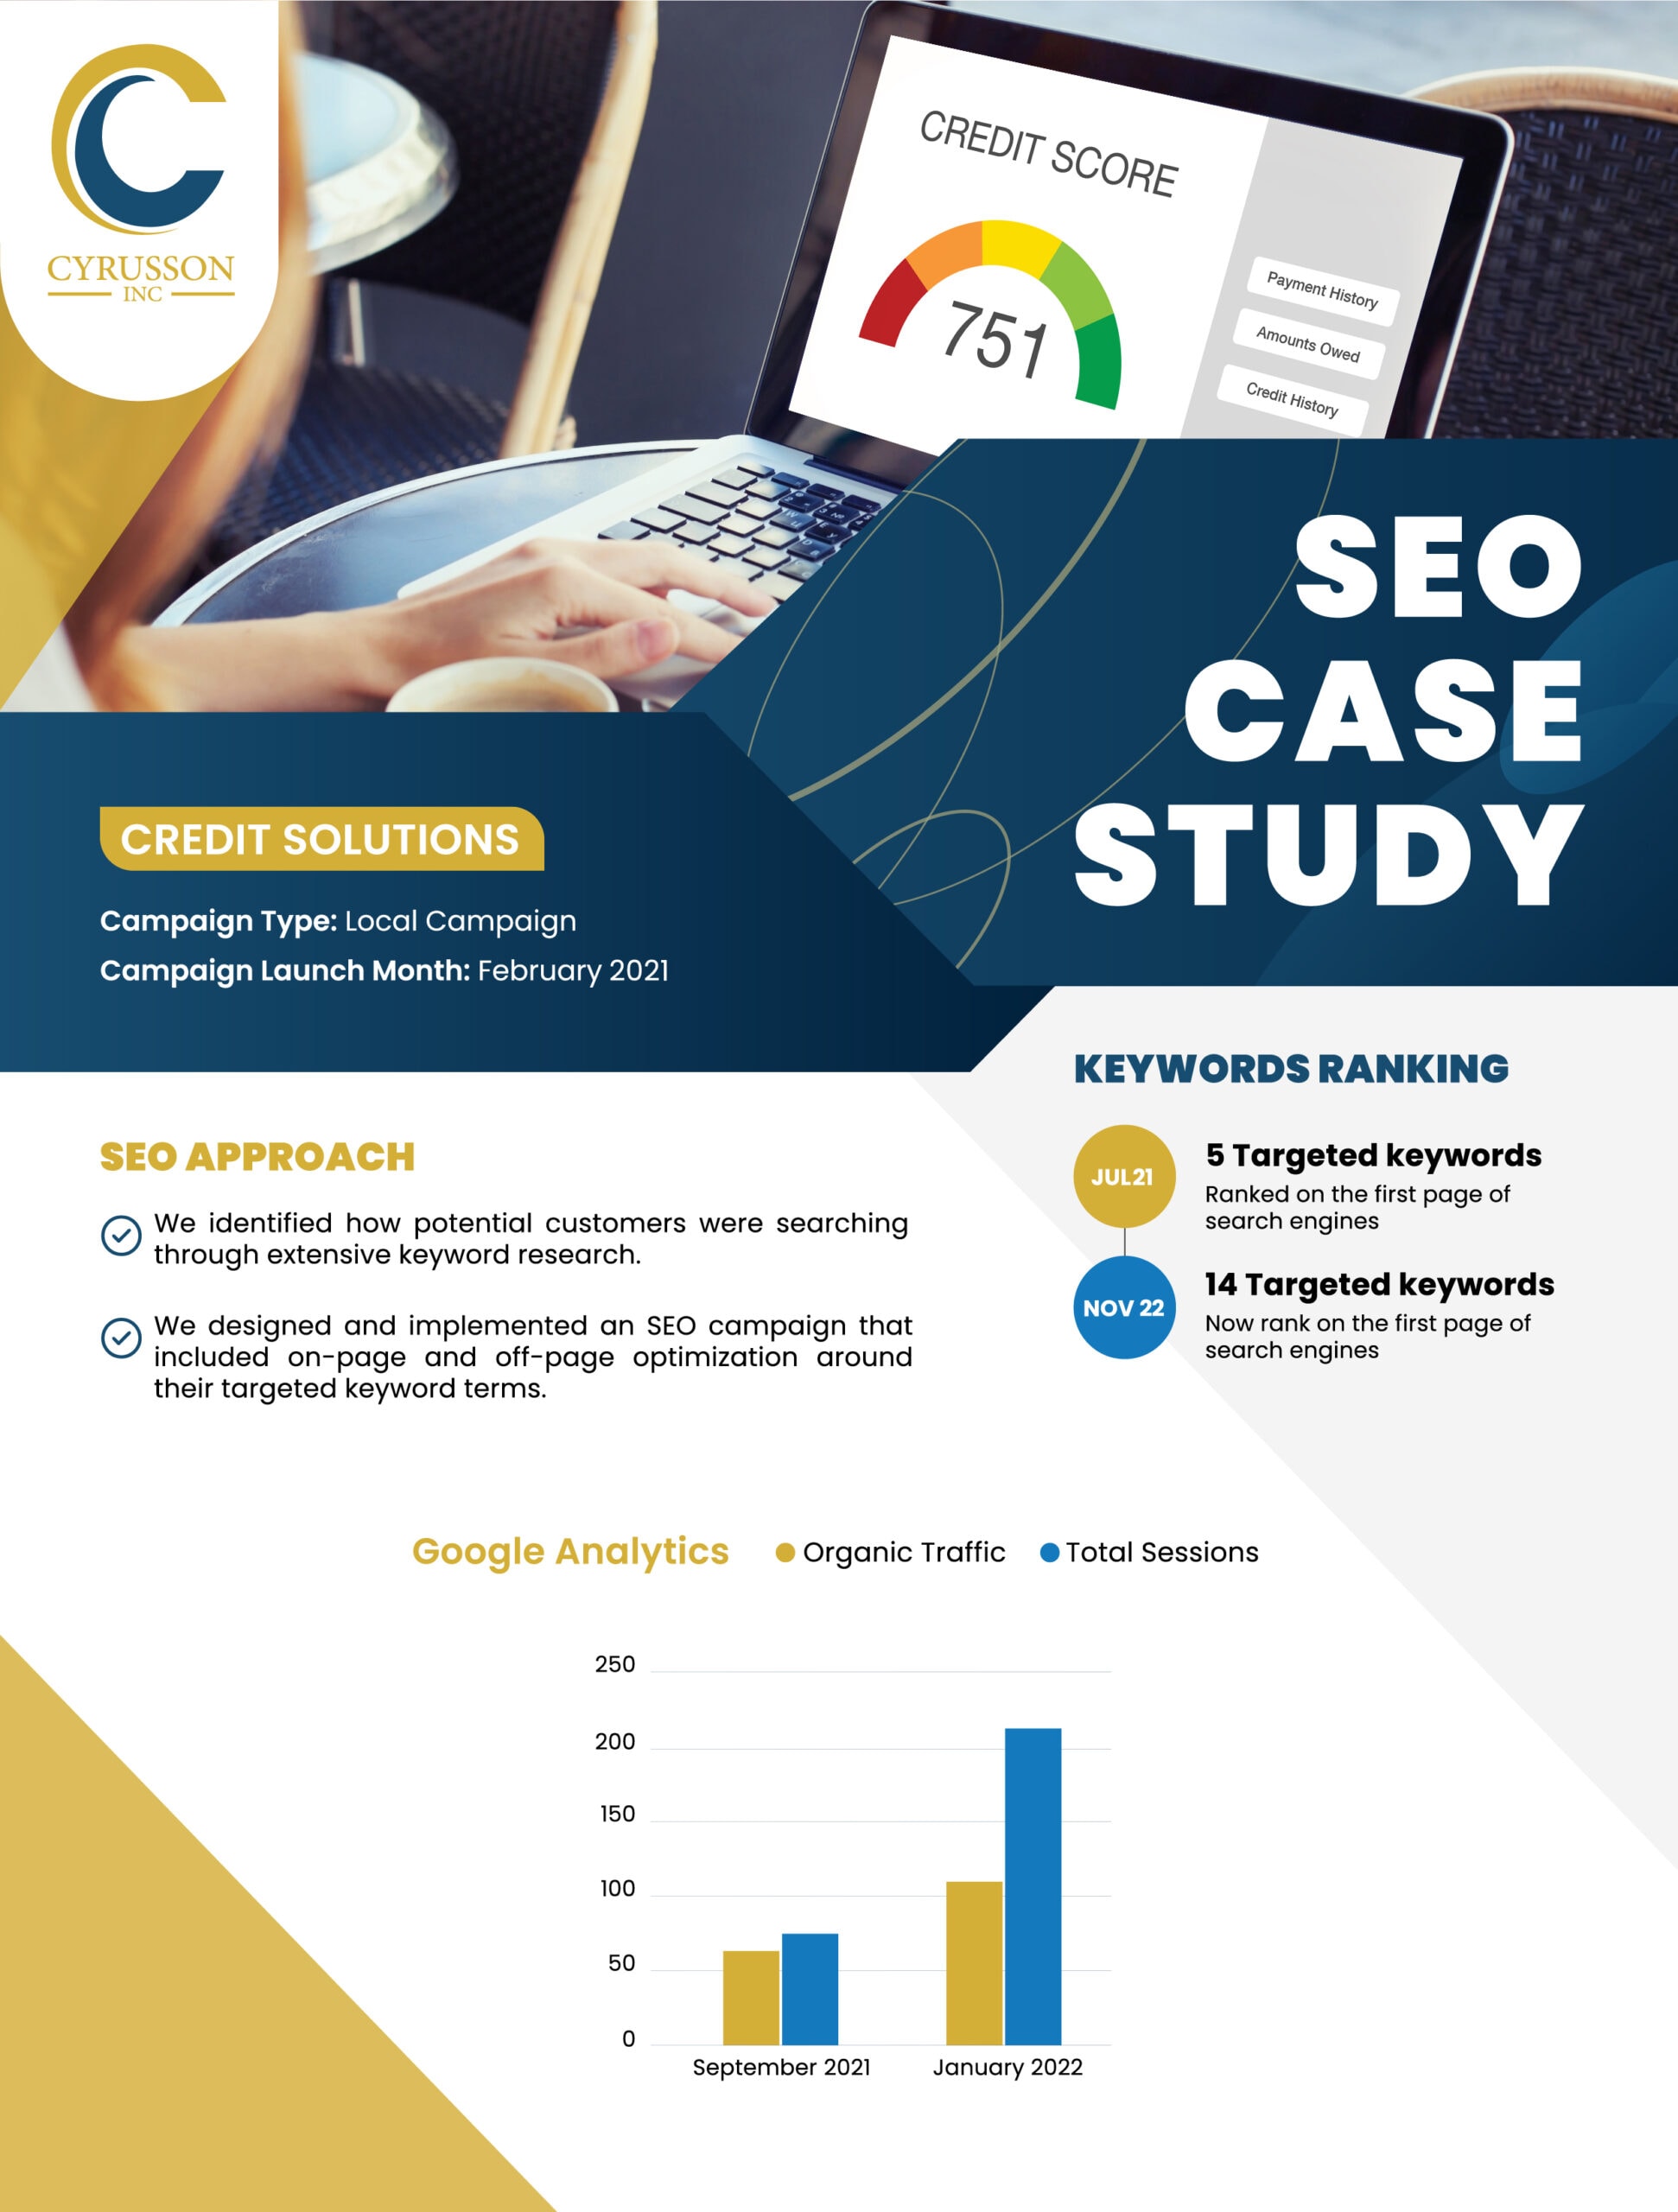 SEO Case Study - Credit Solution Services | Cyrusson